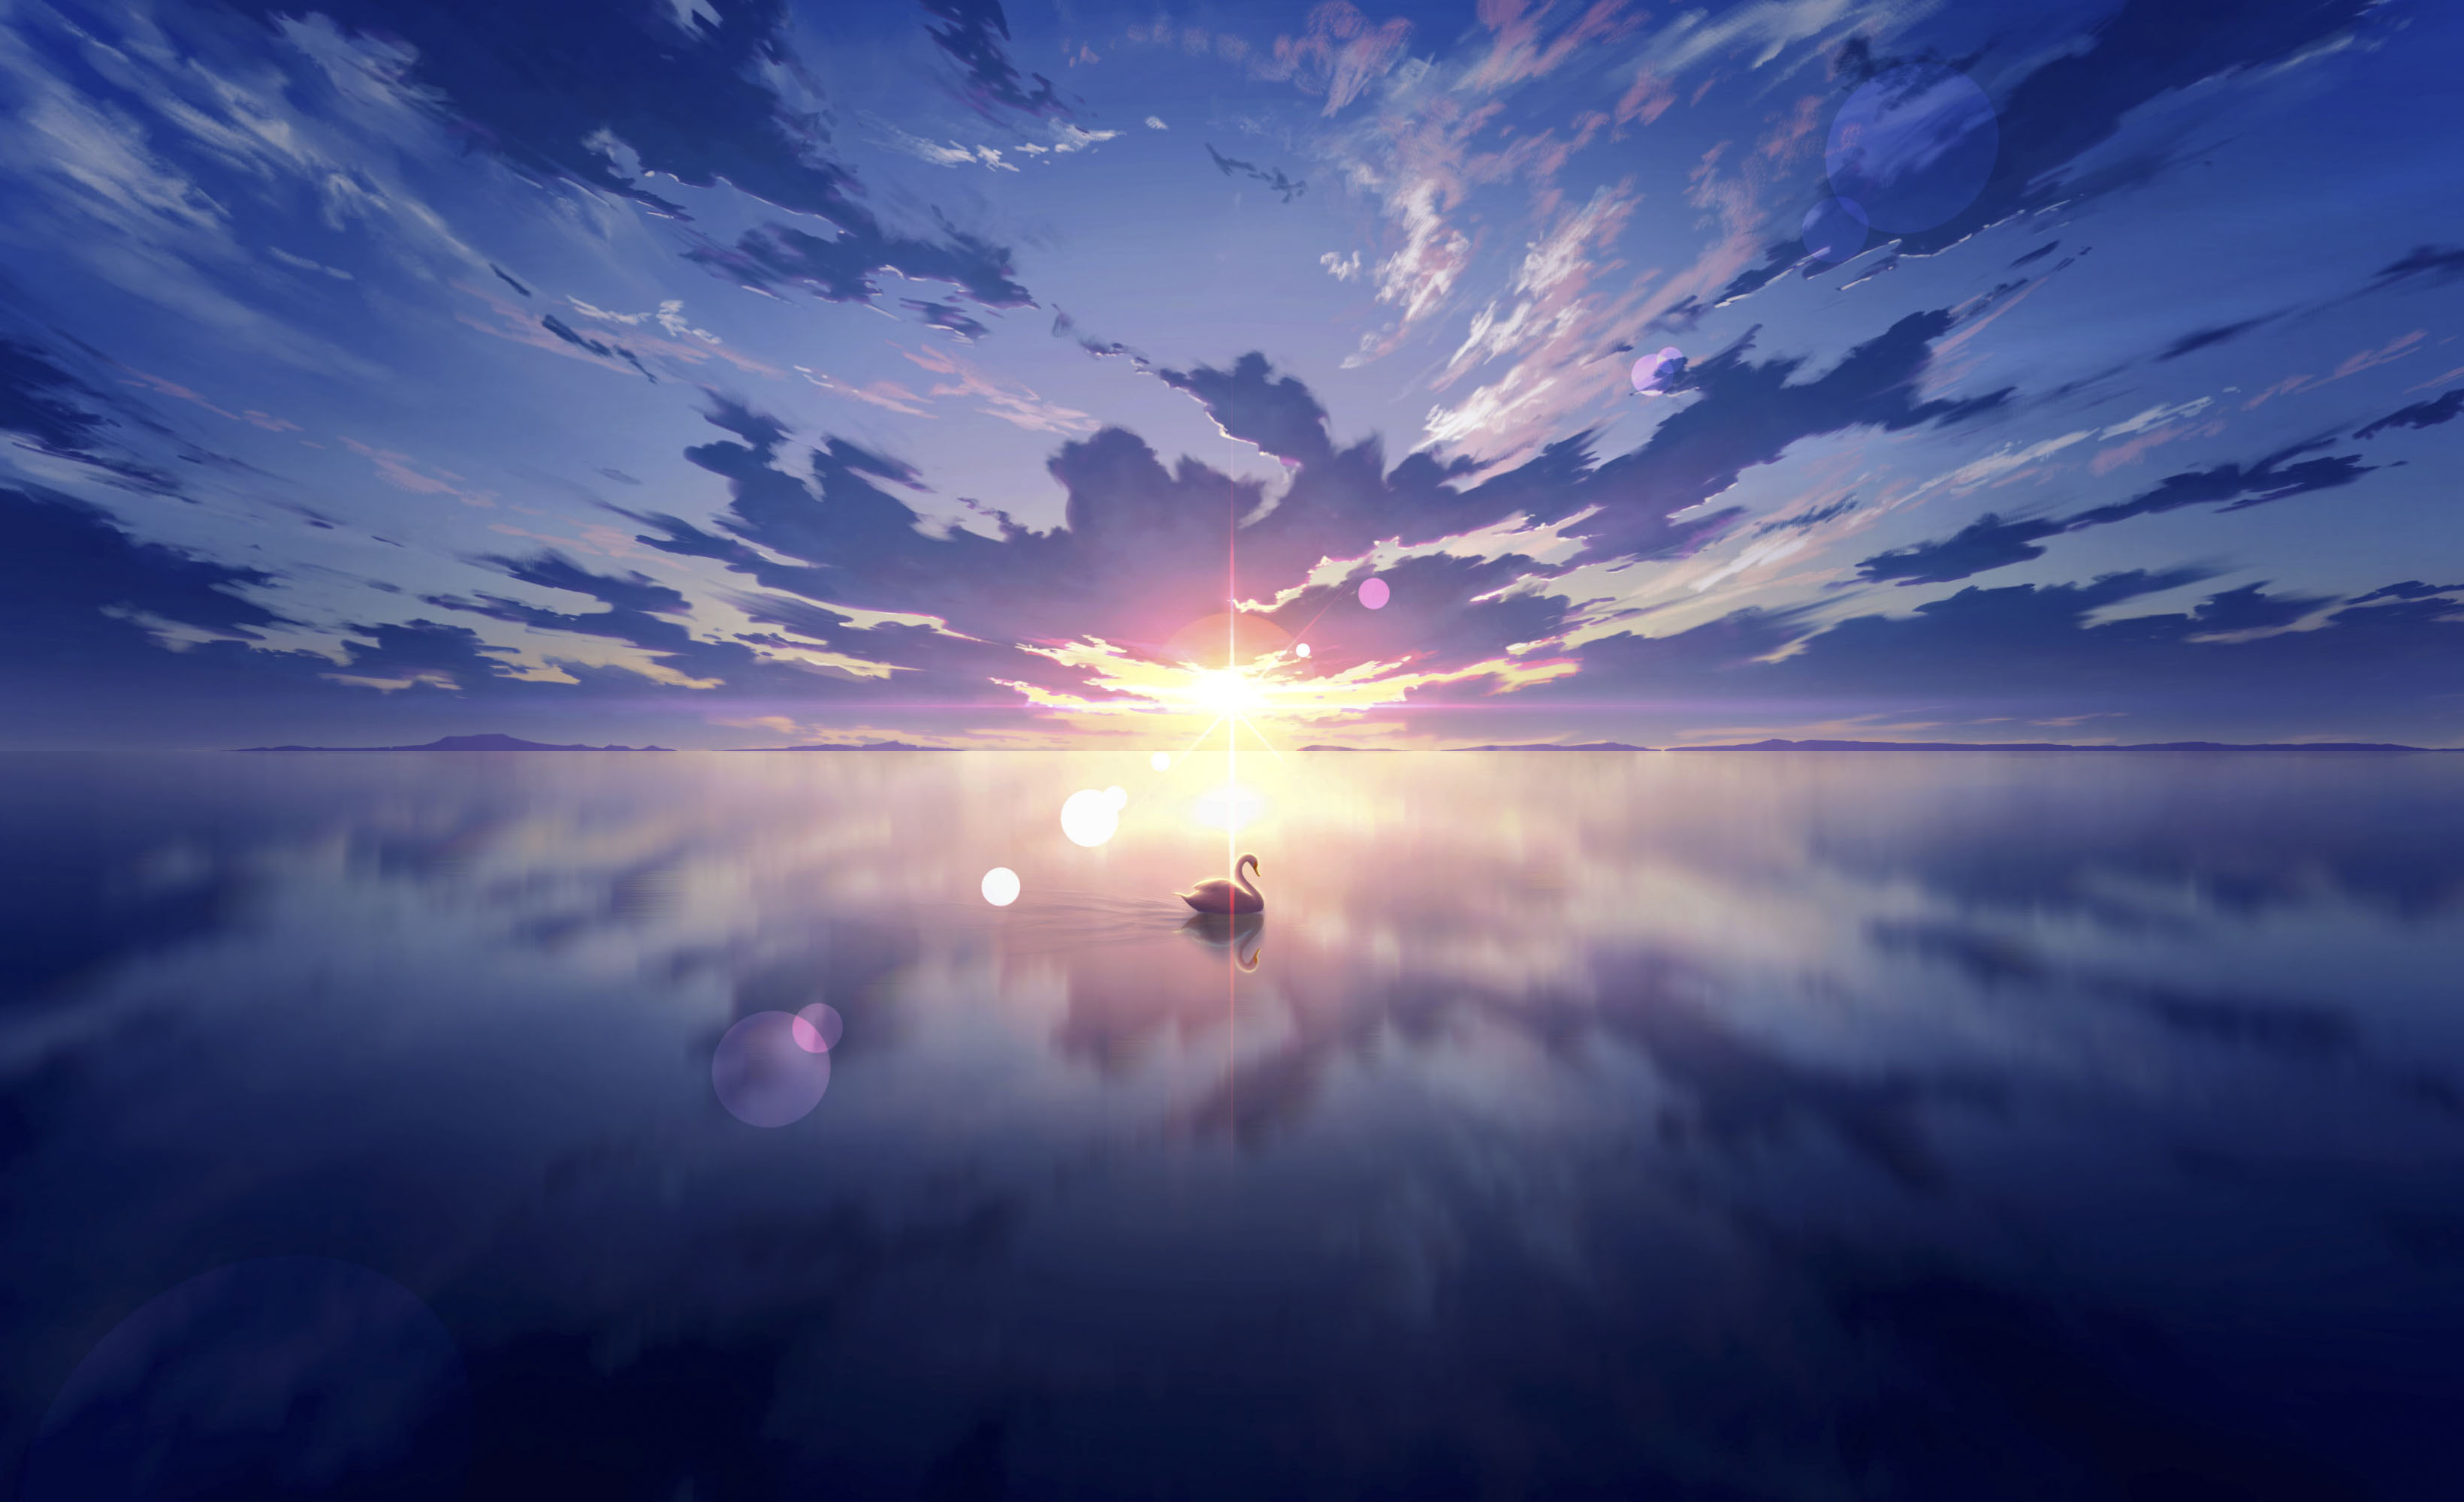 Anime Anime Sky Sky Skyscape Lake Swan Reflection Shining Sunlight Nature Water Sea Landscape Clouds 3280x2000